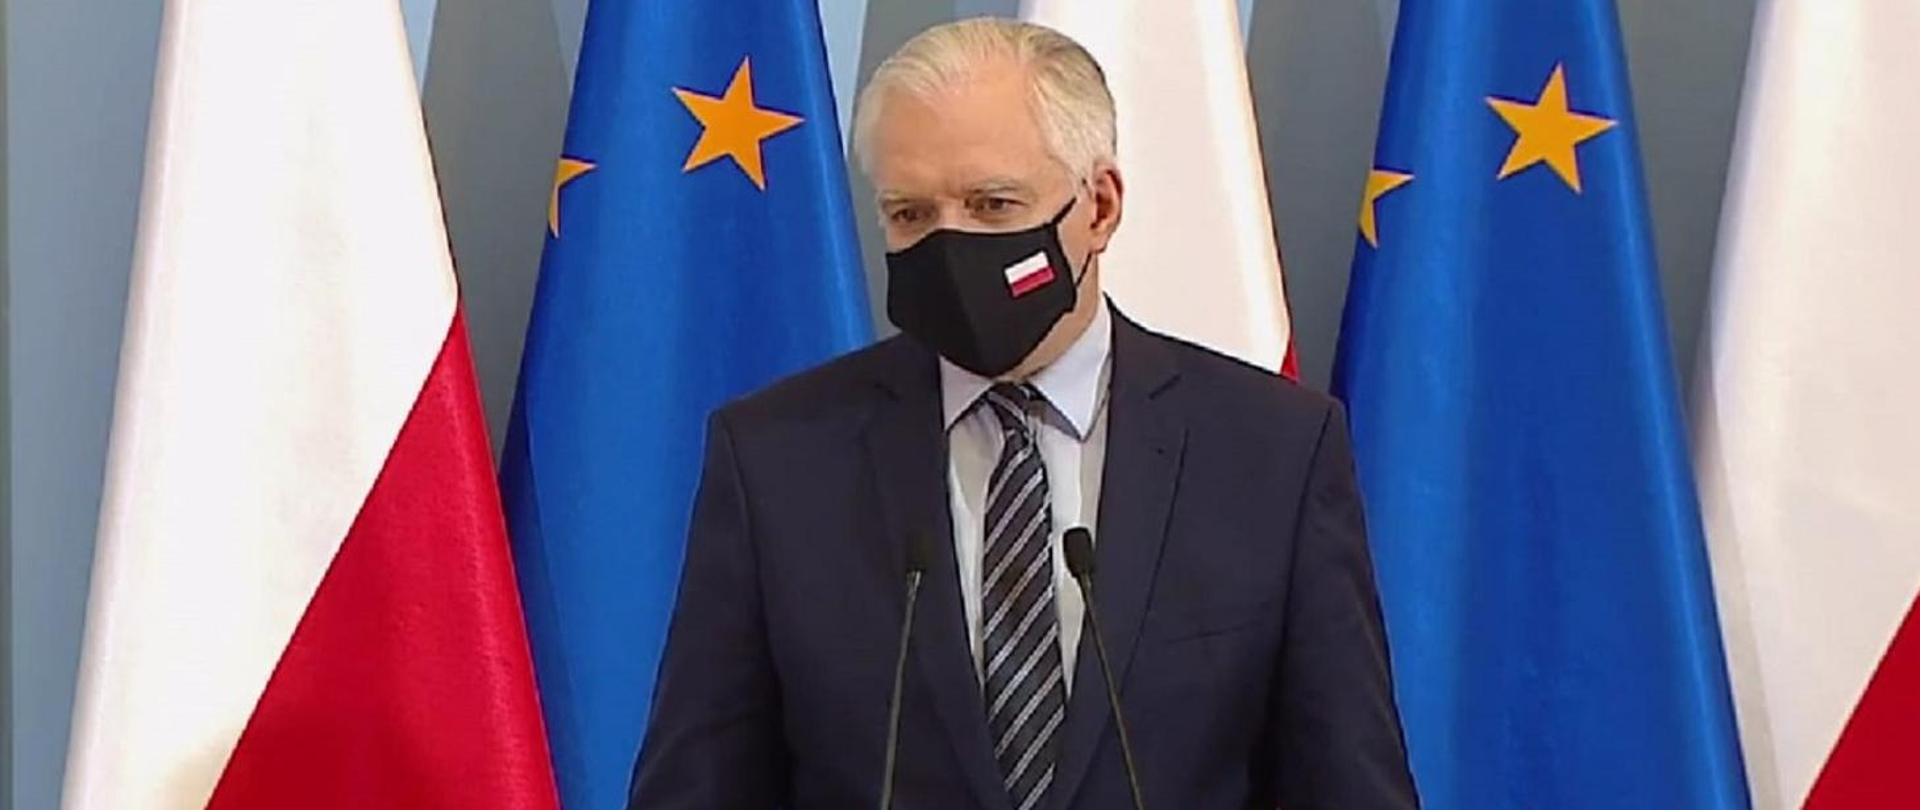 Prime Minister Jarosław Gowin in face mask